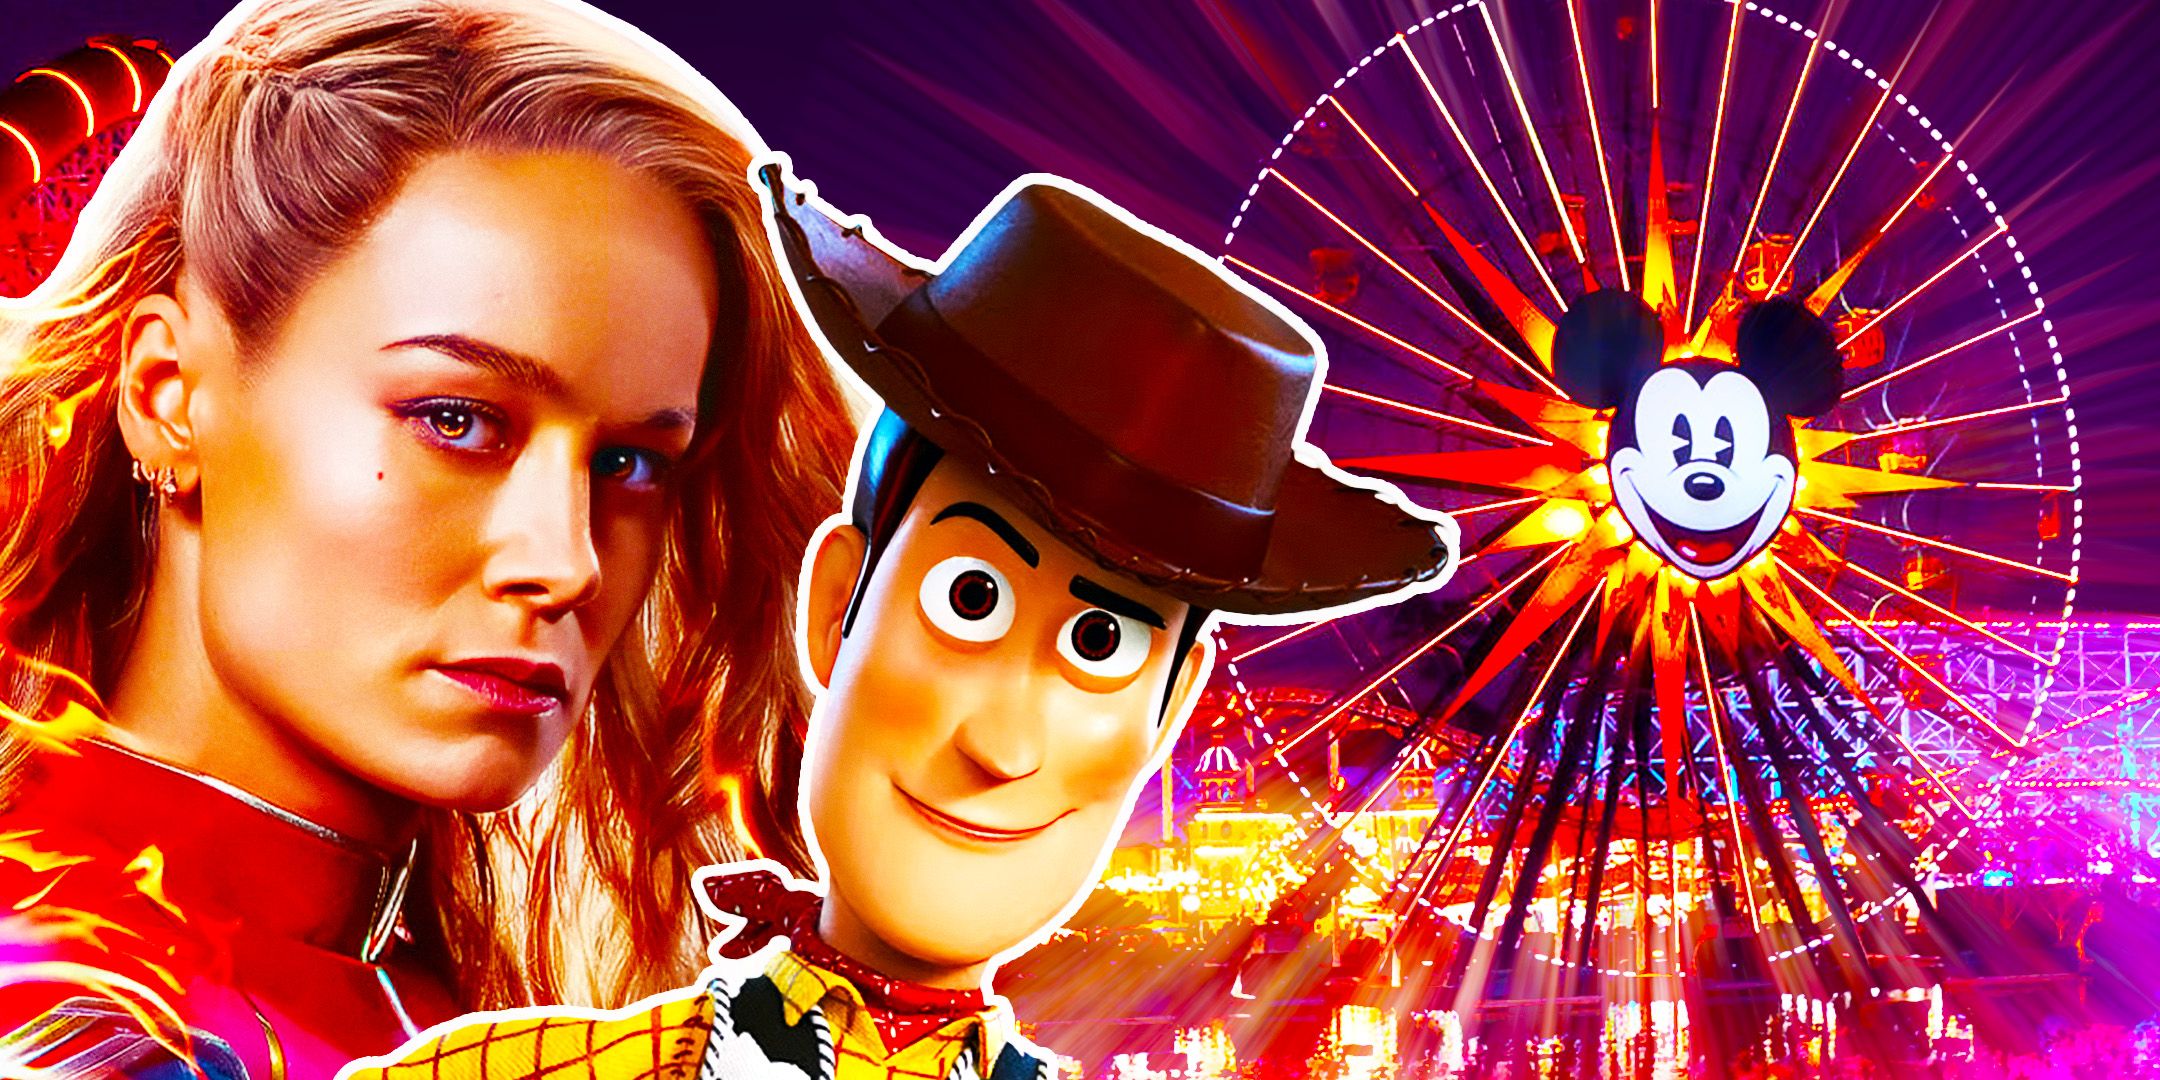 Captain Marvel and Woody from Toy Story in front of Disneyland's ferris wheel